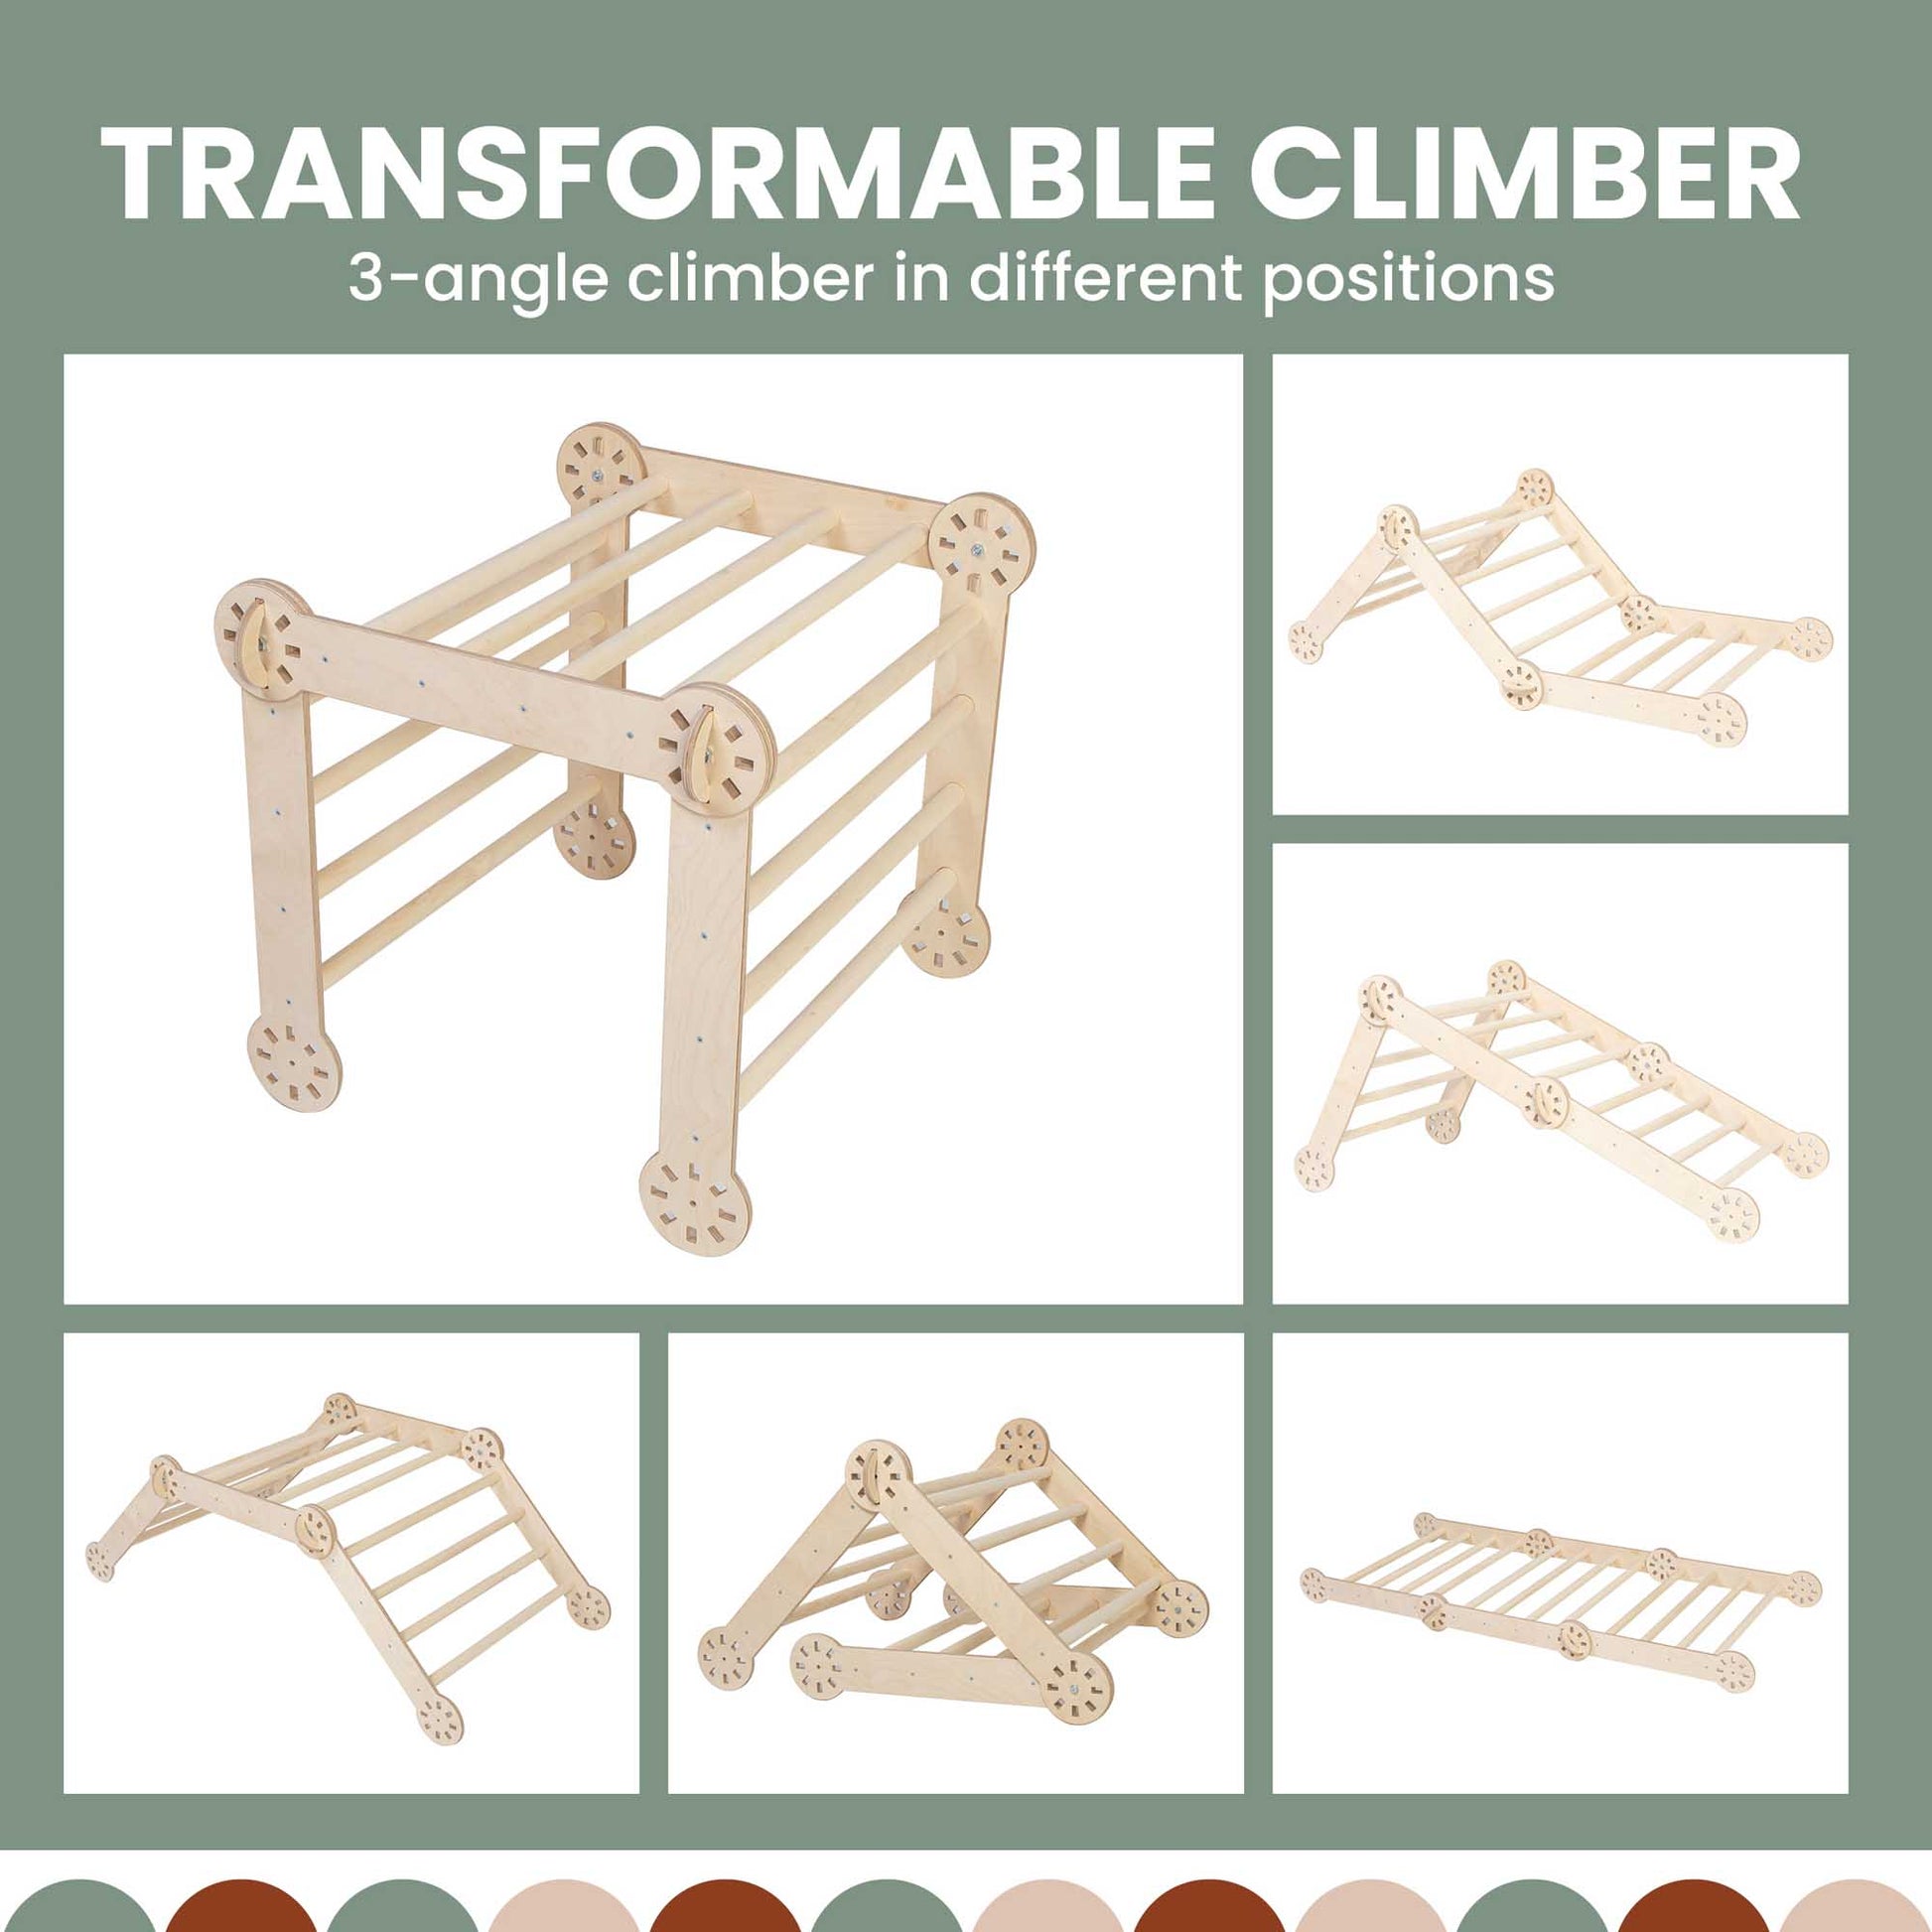 A set of Foldable climbing triangles, Transformable climbing gyms, and a ramp made from Baltic birch plywood for hassle-free storage.